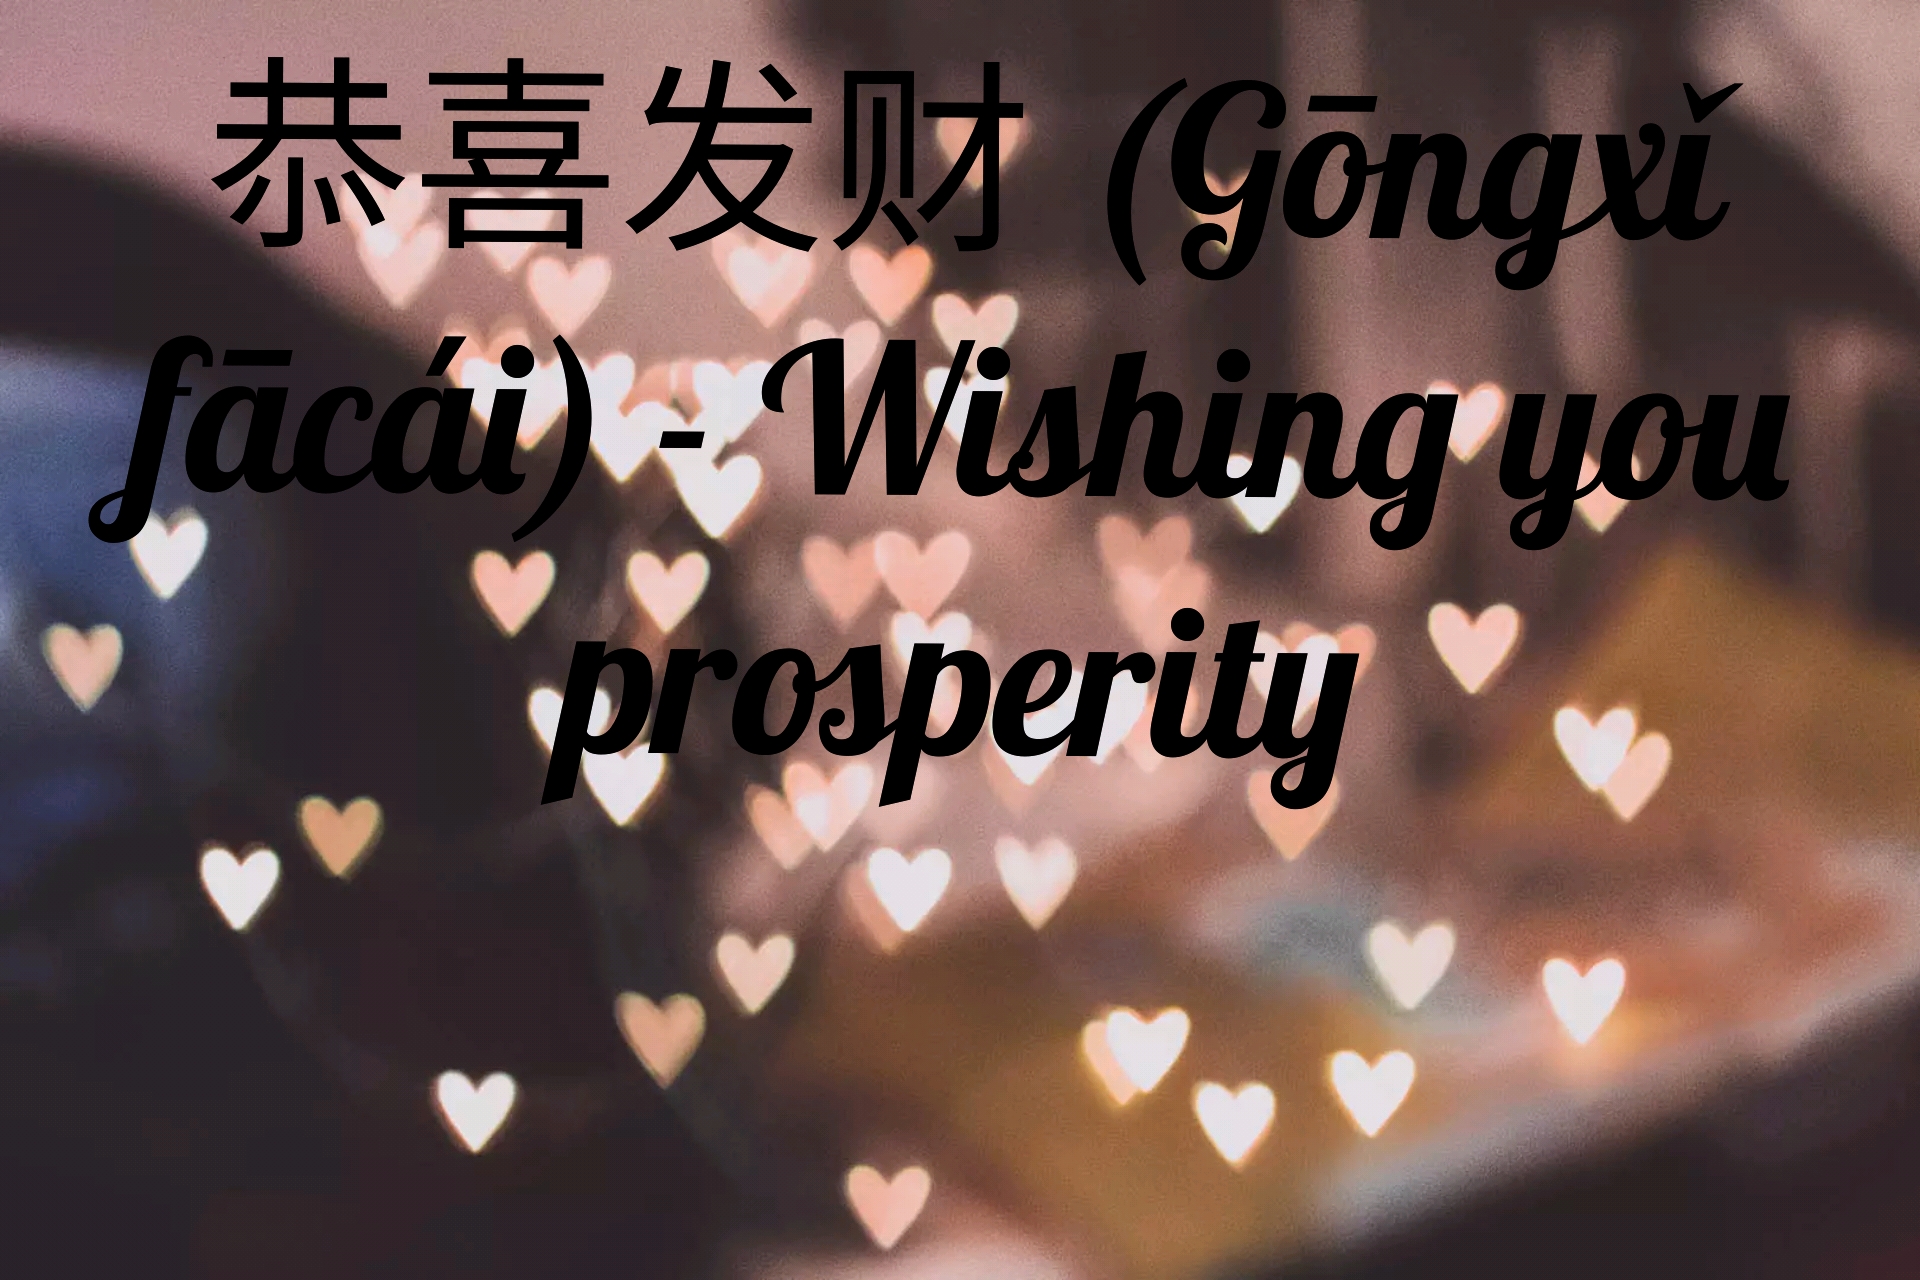 Chinese greetings for new Year